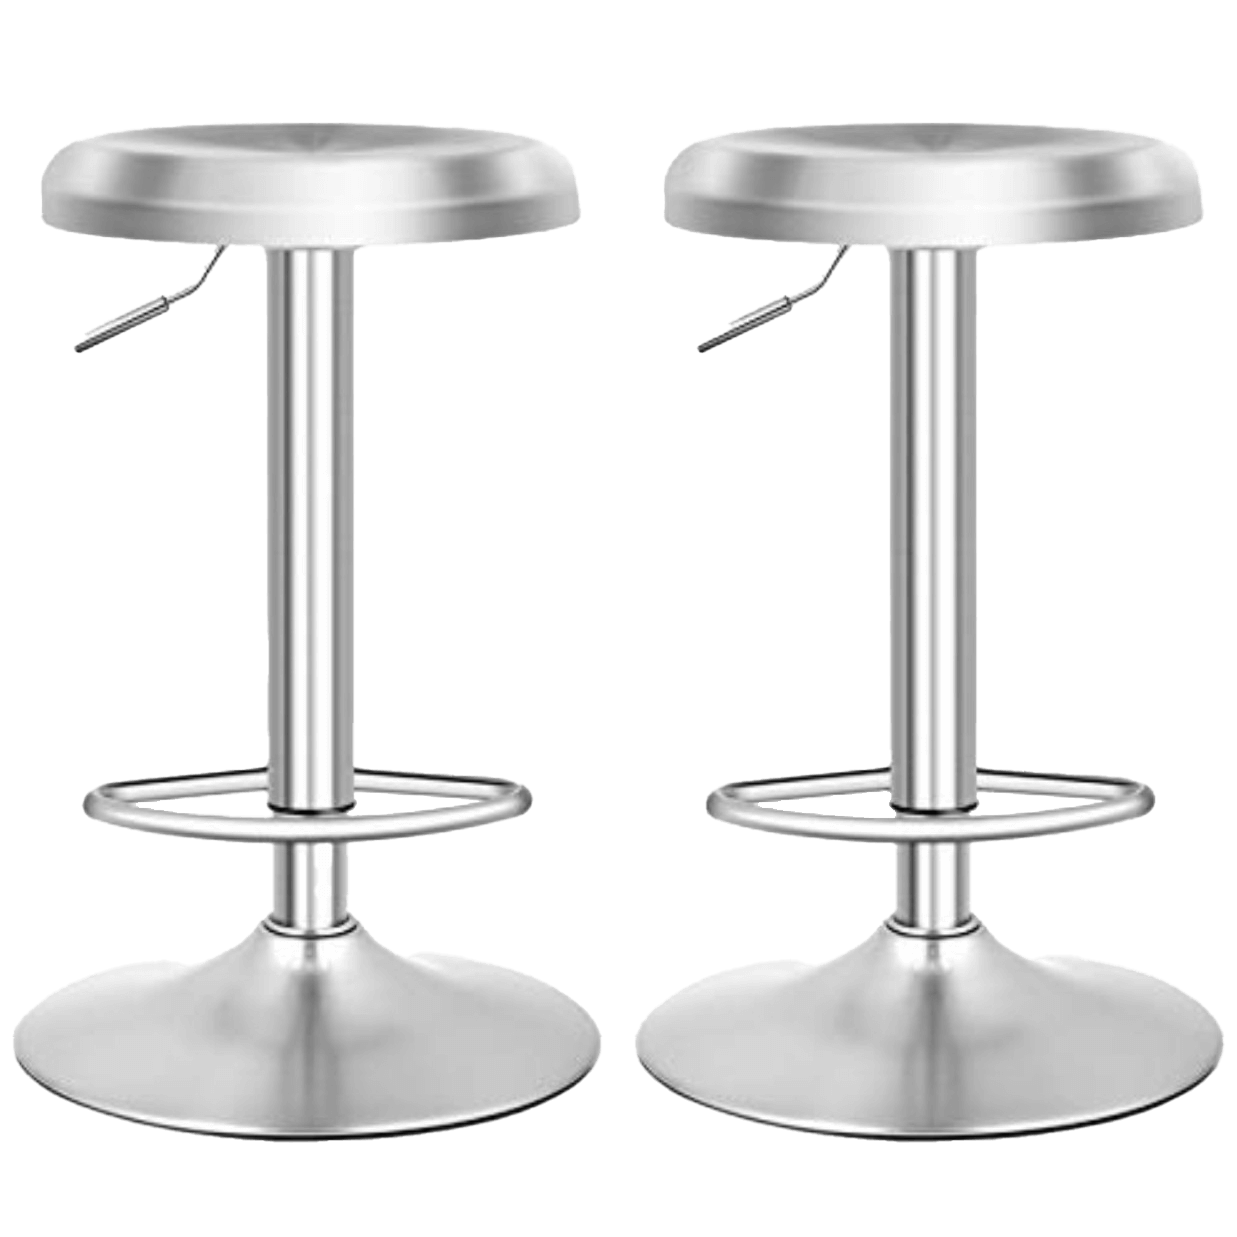 TrueGether-Stainless-Steel-Counter-Stool